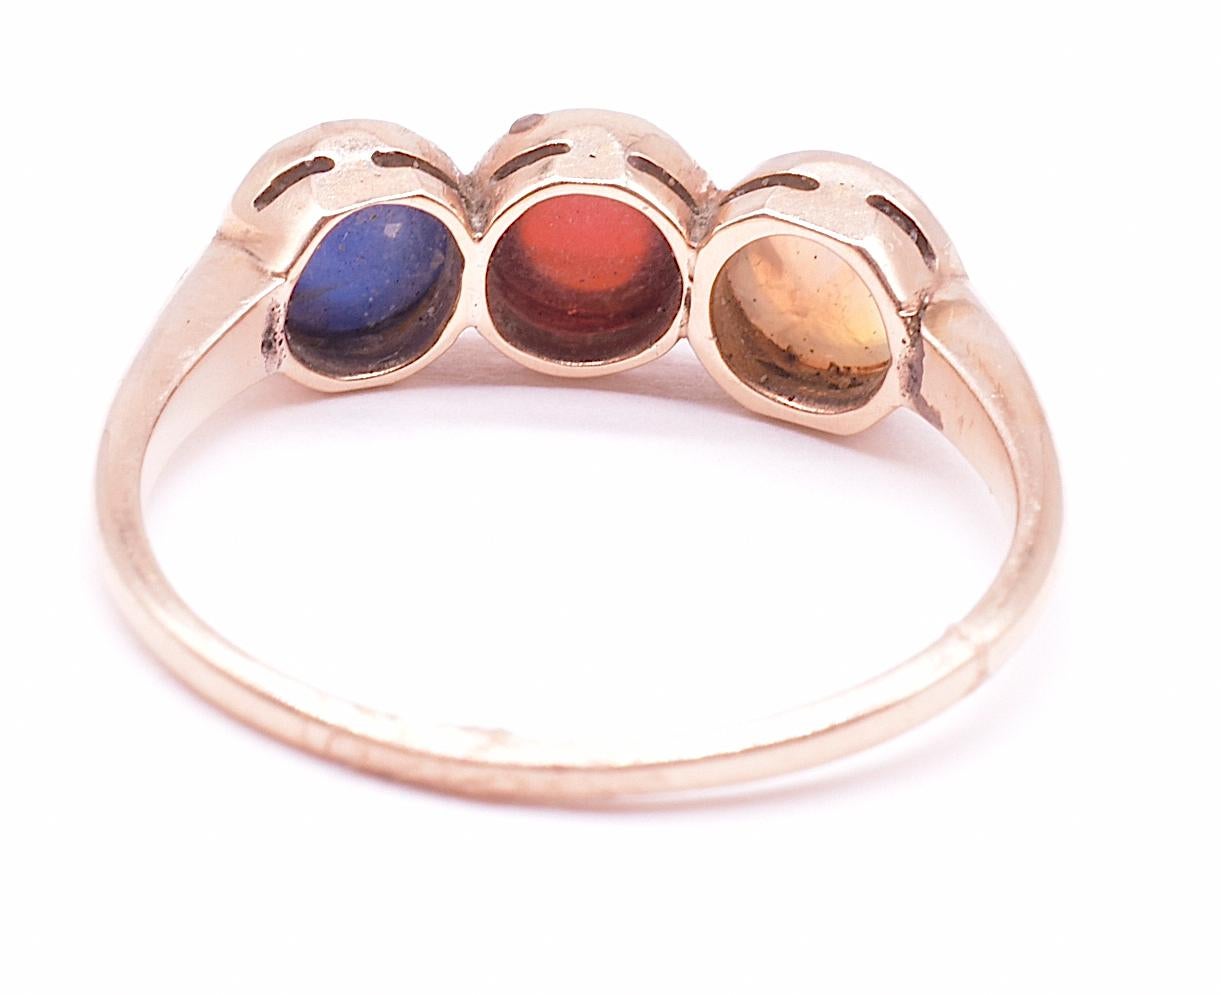 Victorian Trilogy Ring of Opal, Garnet, and Sapphire 3